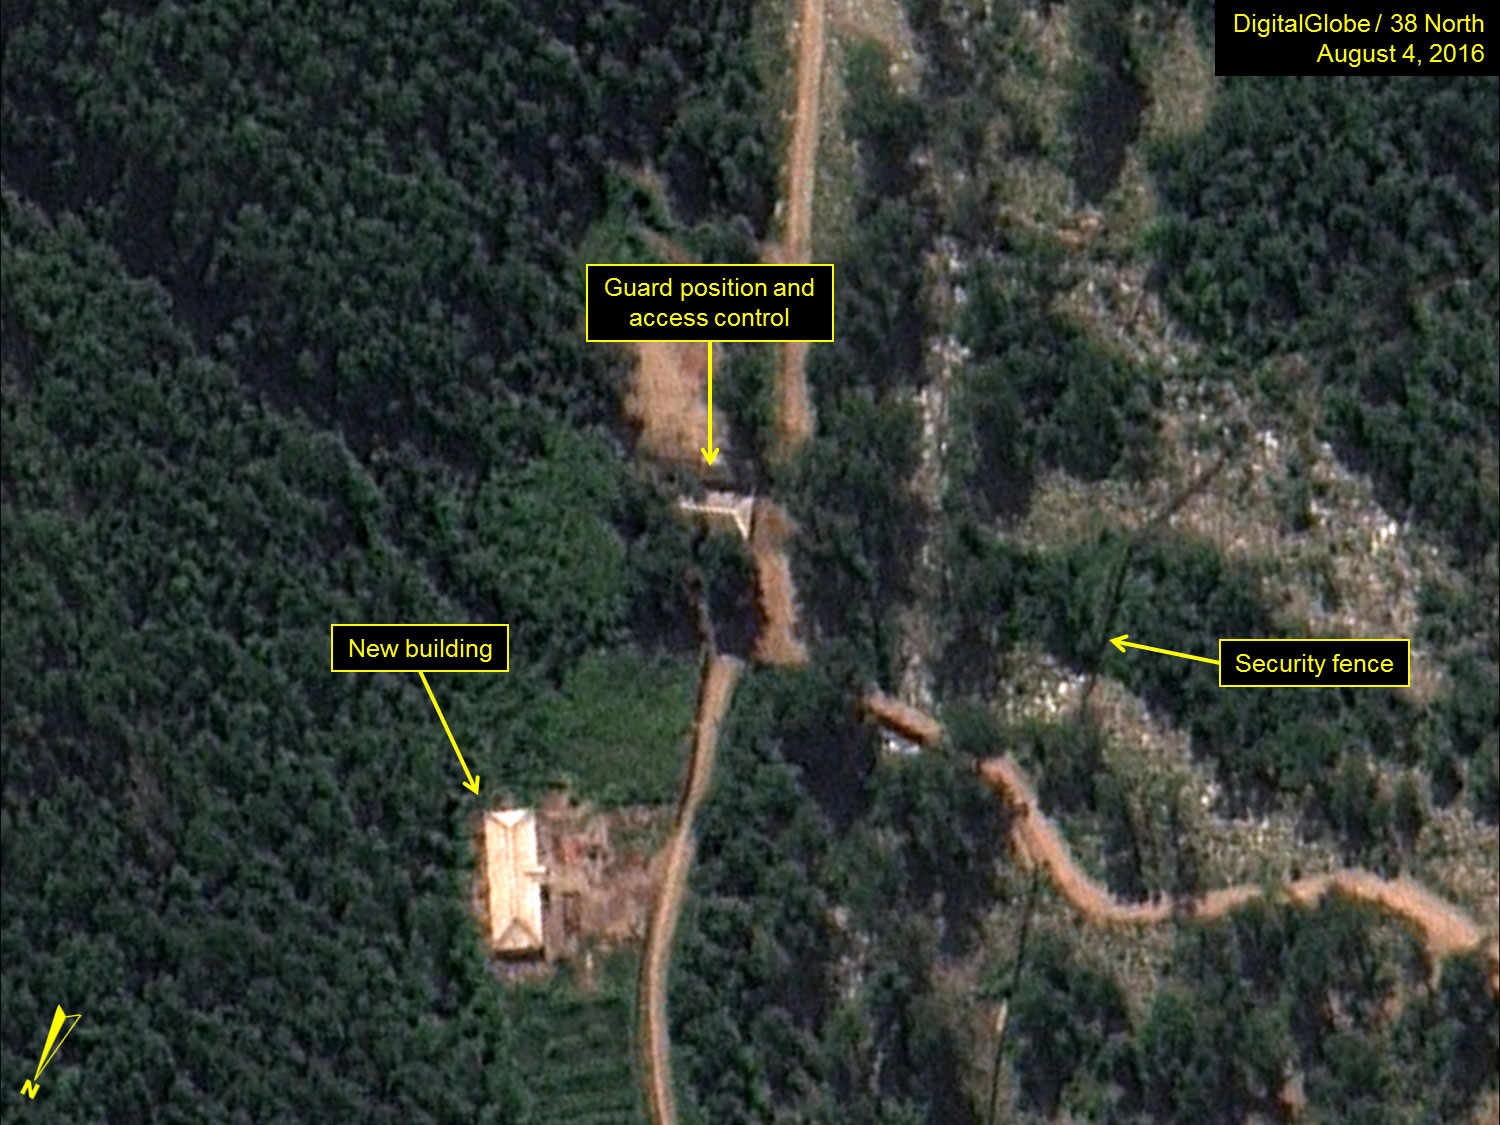 Continued Unidentified Activity at Site of North Korea’s Last Nuclear Test